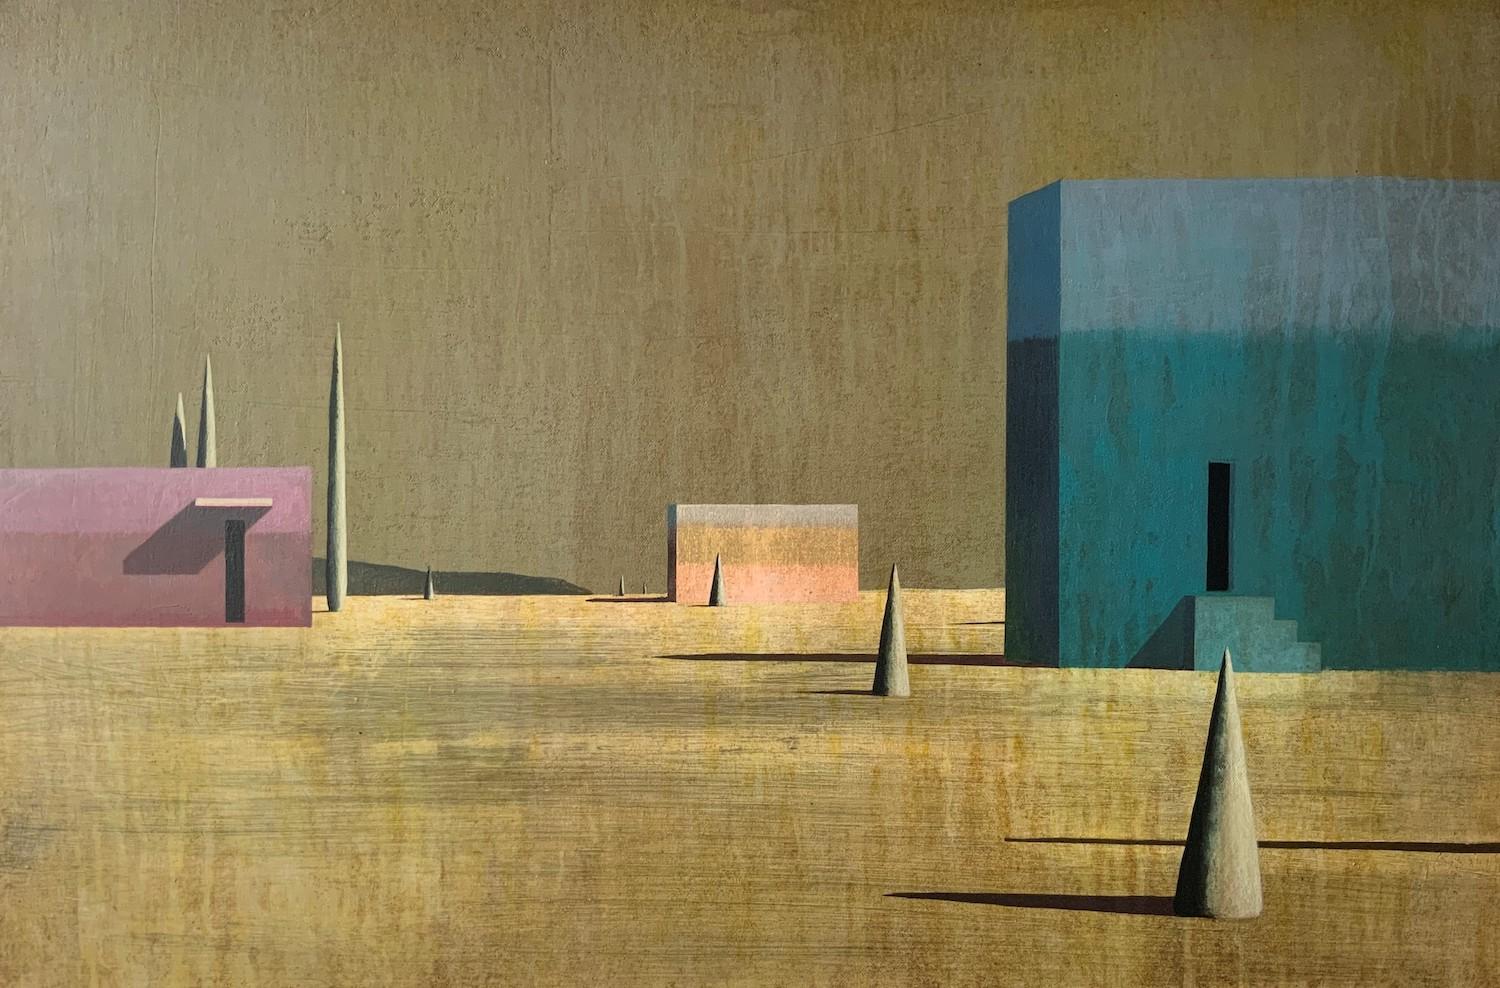 TRESGRA, painting by Spanish contemporary artist Ramon Enrich. Acrylic on canvas, 60 x 90 cm. Signed, sold unframed.
Enrich's work revolves around conversation between architecture and landscape, inviting the viewer on a visual stroll through vast